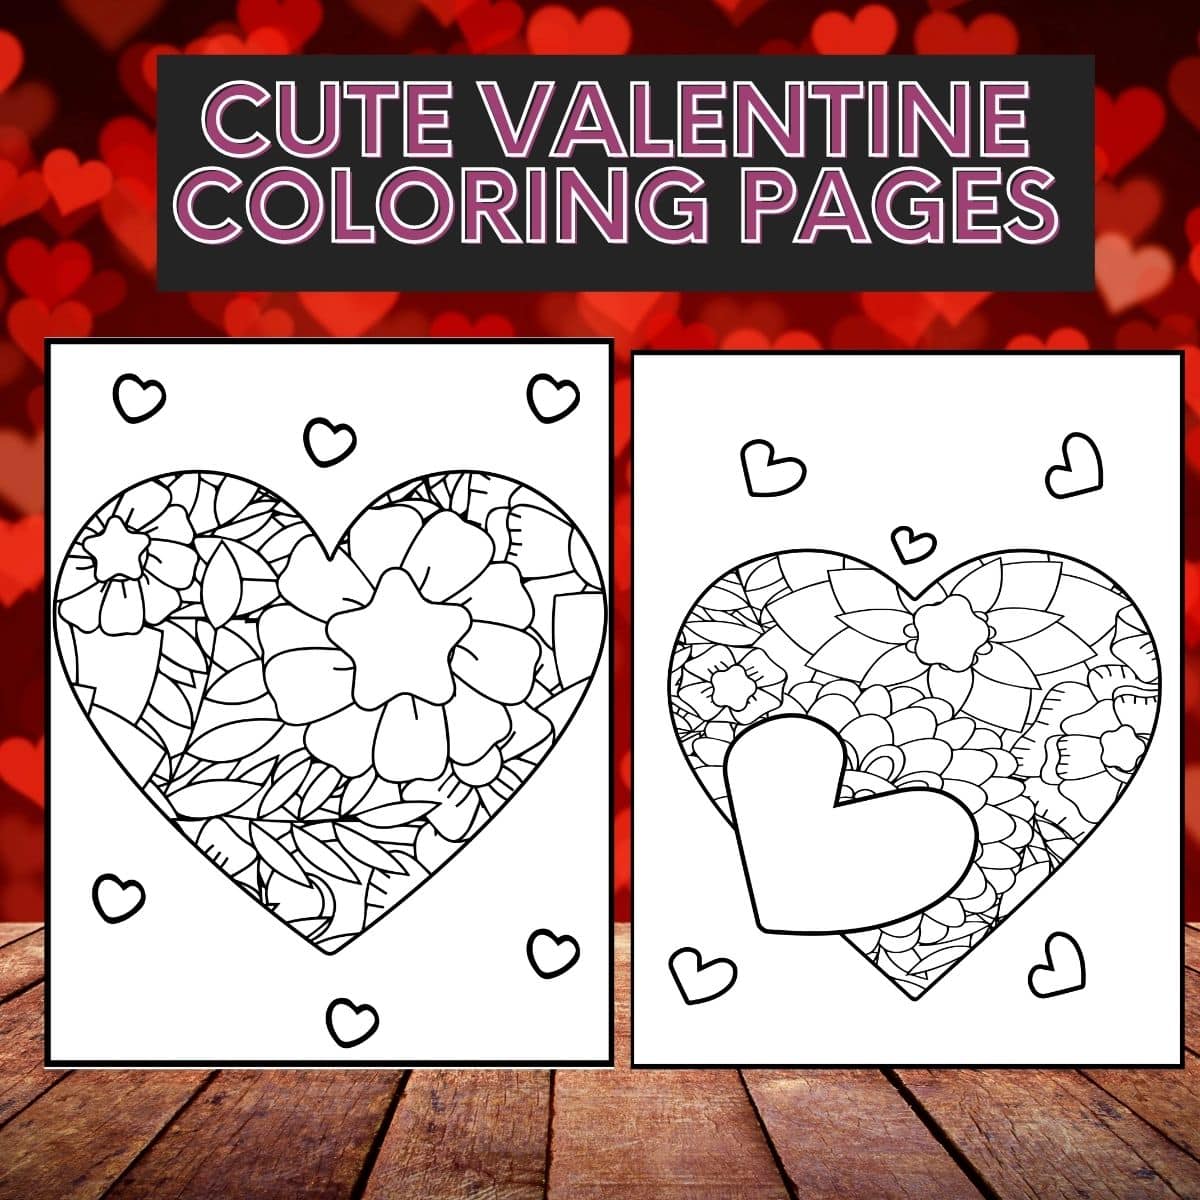 Cute valentine coloring pages